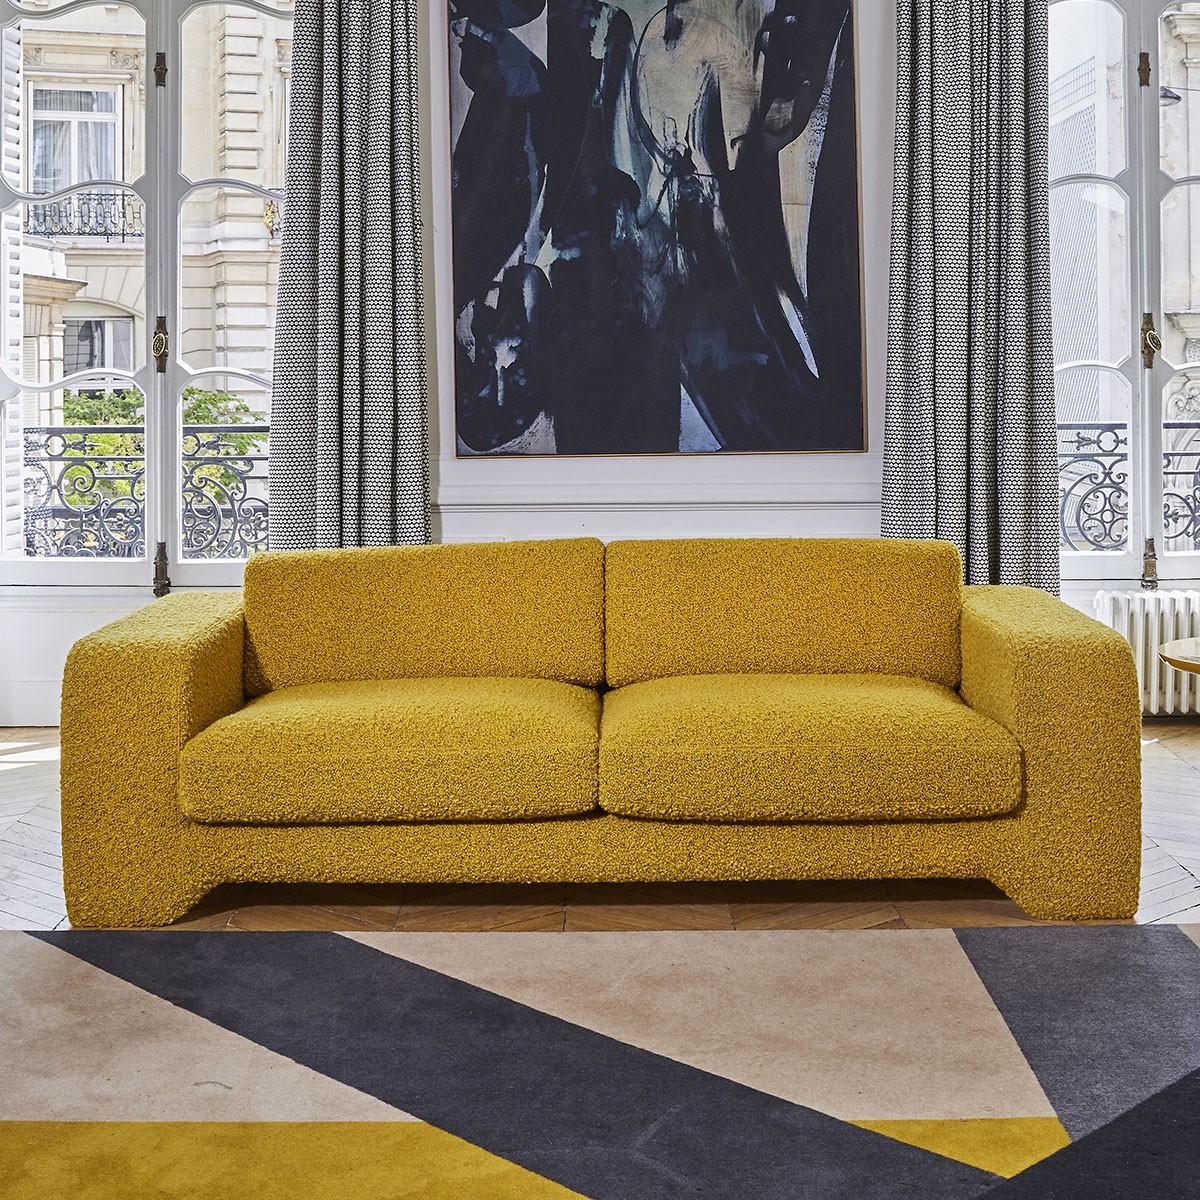 Popus Editions Giovanna 4 seater sofa in Gray Como Velvet Upholstery

Giovanna is a sofa with a strong profile. A sober, plush line, with this famous detail that changes everything, so as not to forget its strength of character and this charming